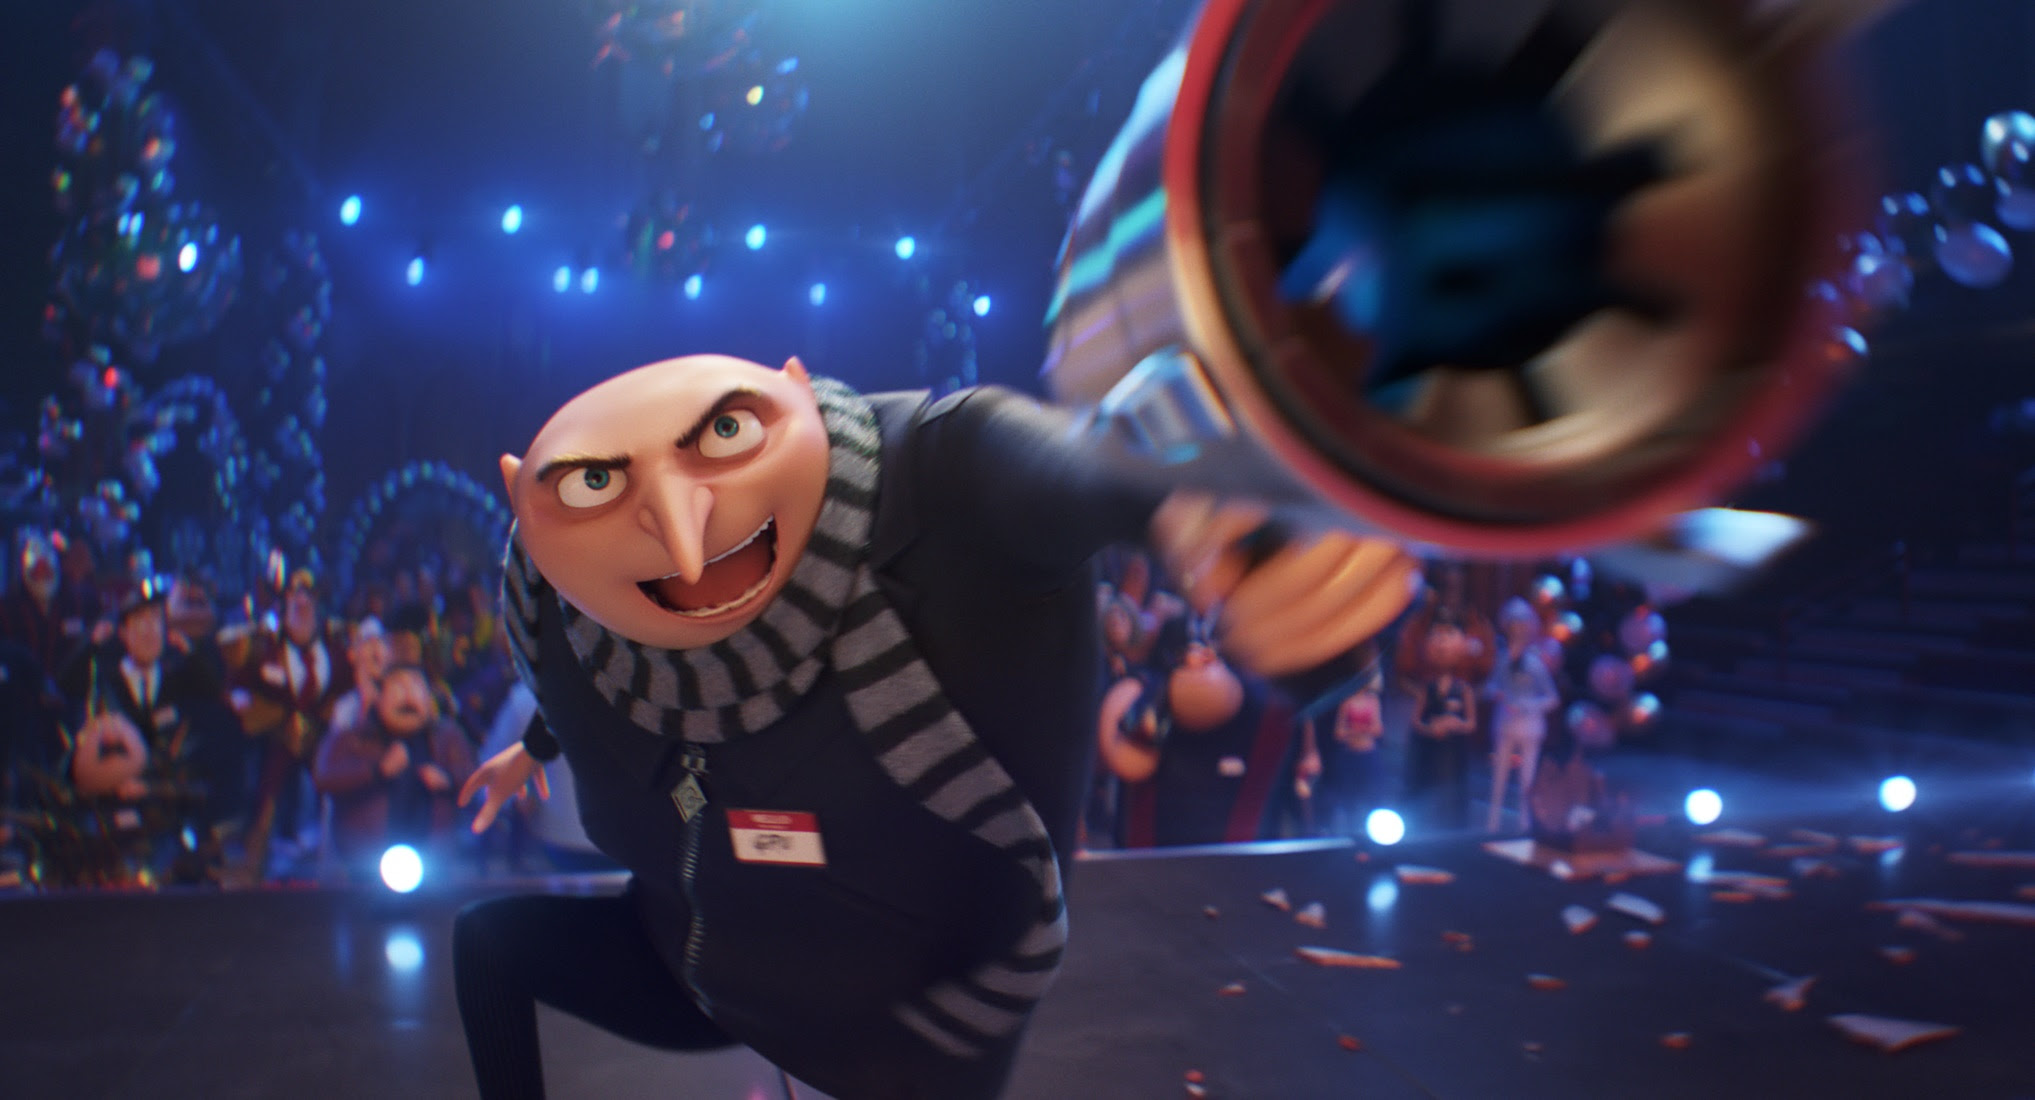 #FIRSTLOOK: NEW TRAILER & POSTER FOR “DESPICABLE ME 4”